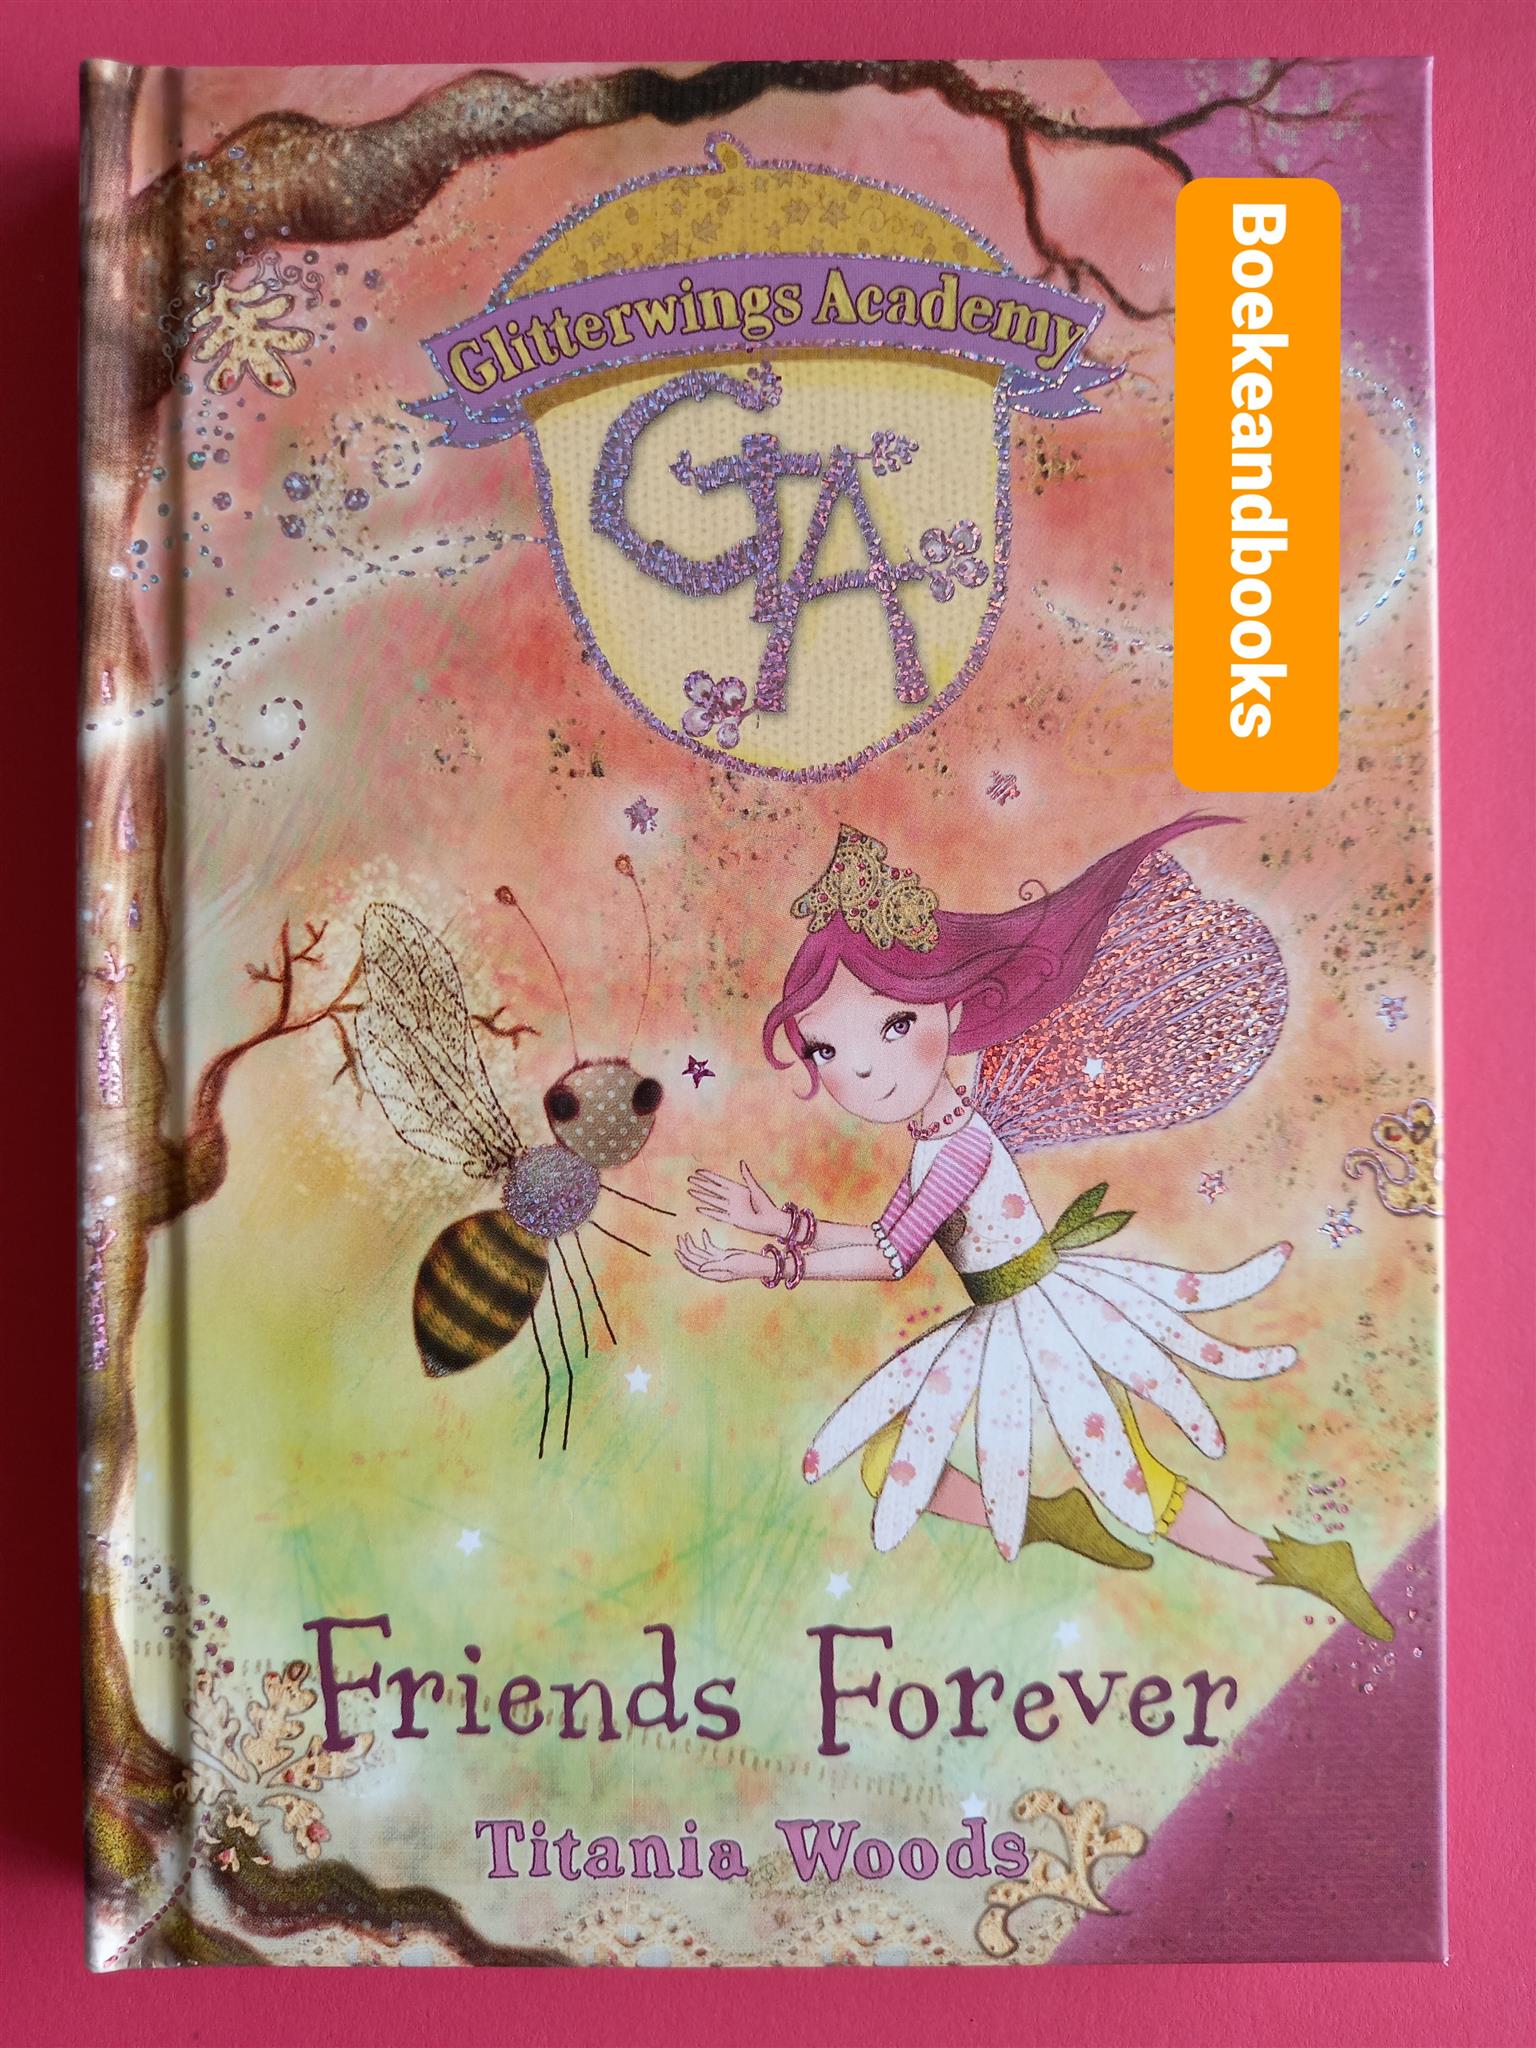 Friends Forever - Titania Woods - Glitterwings Academy #3.